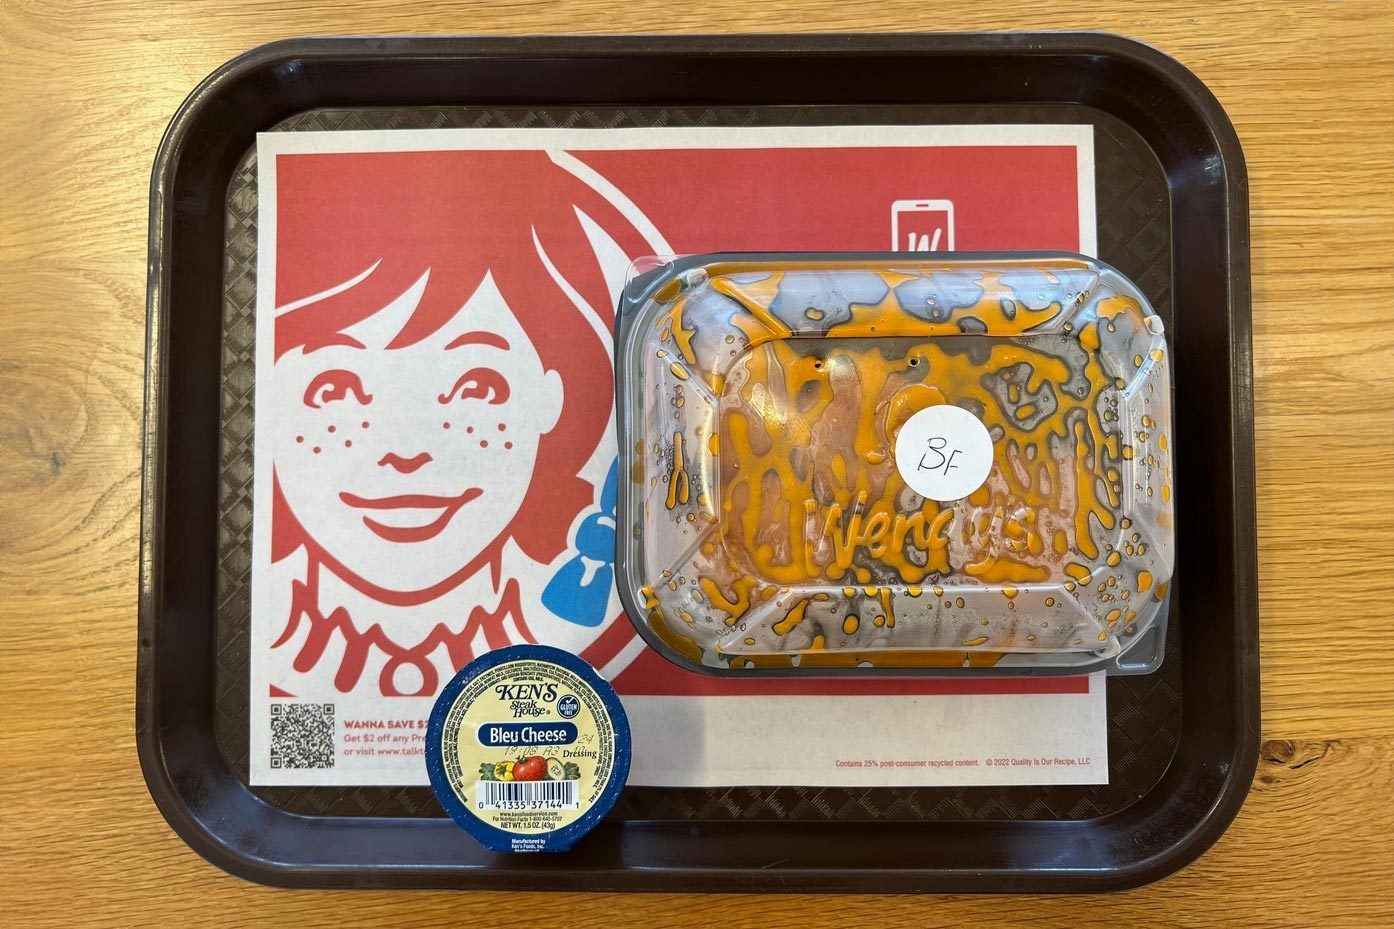 Wendys Saucy Nuggs in container on tray, buffalo